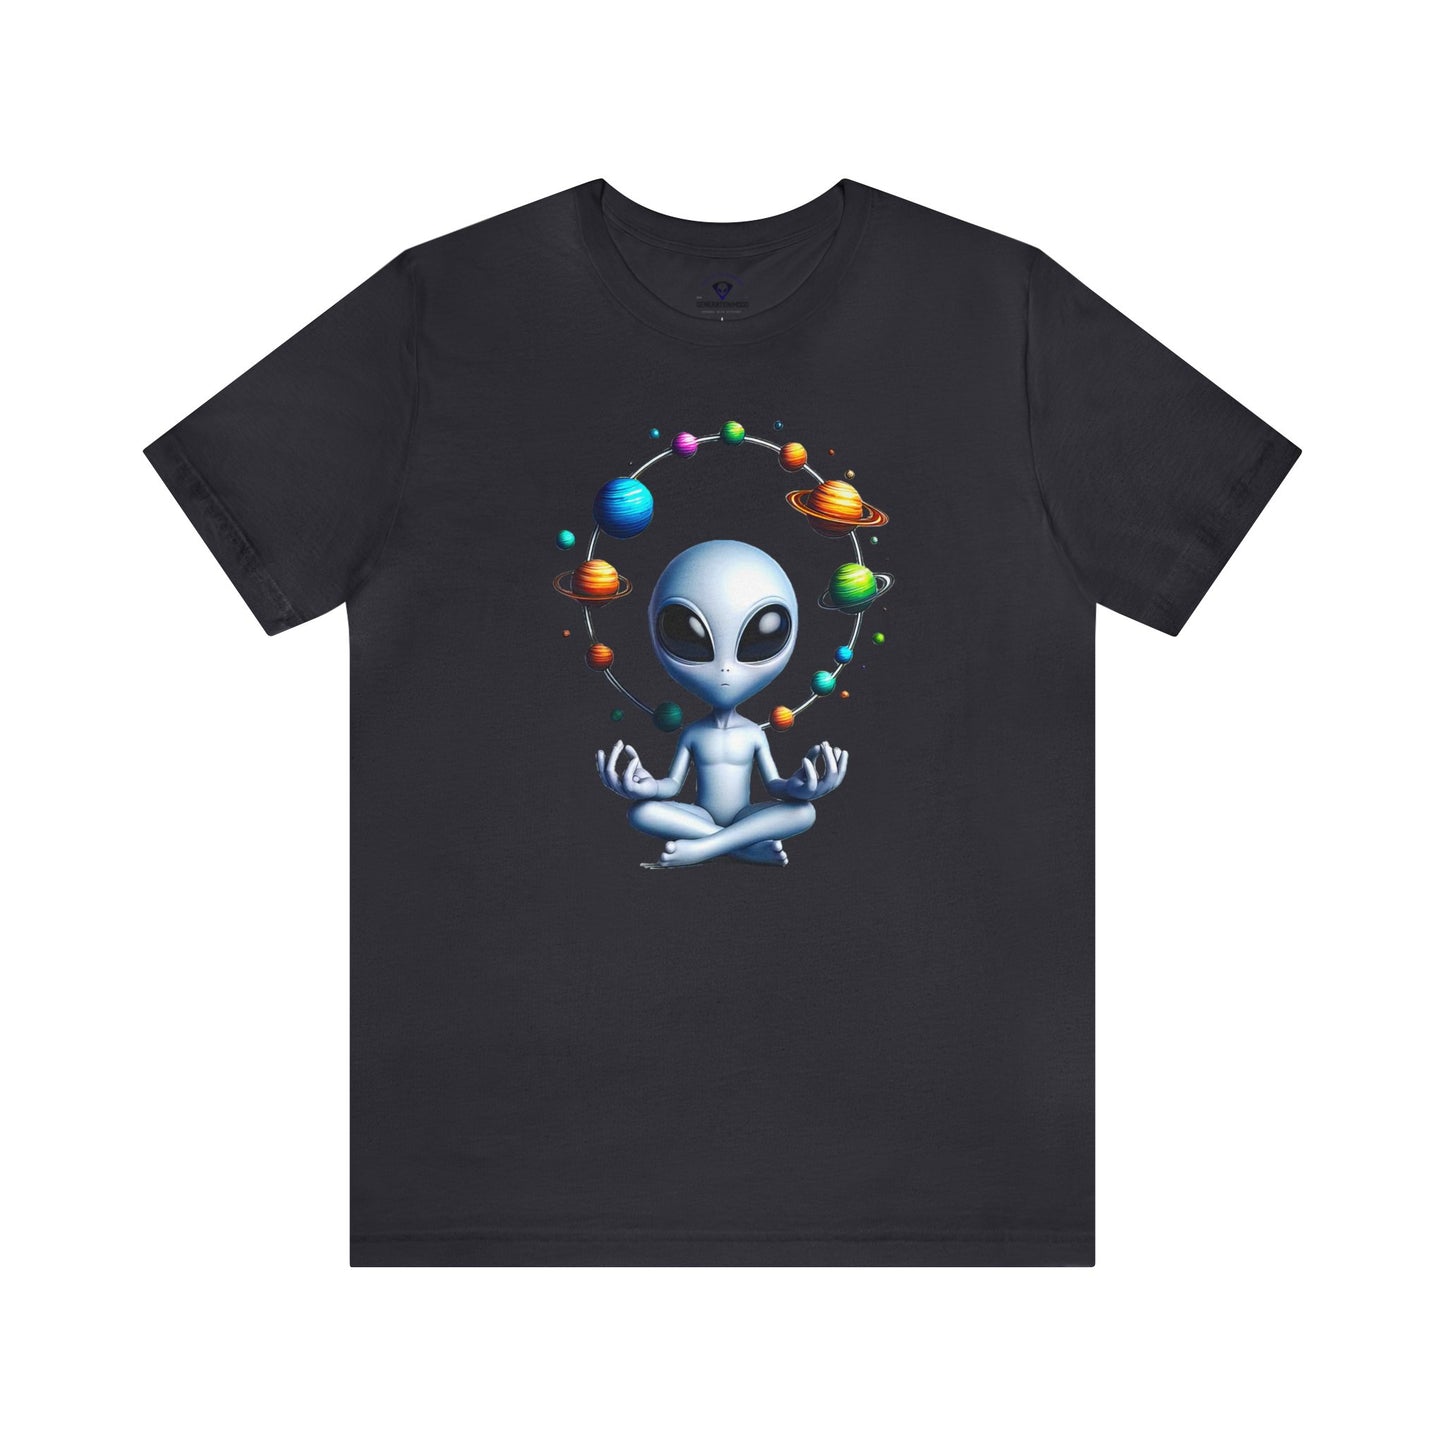 Generation Mood's Meditation in the Cosmos: Alien Sweatshirt , Find Your Zen Among the Planets Shirt.